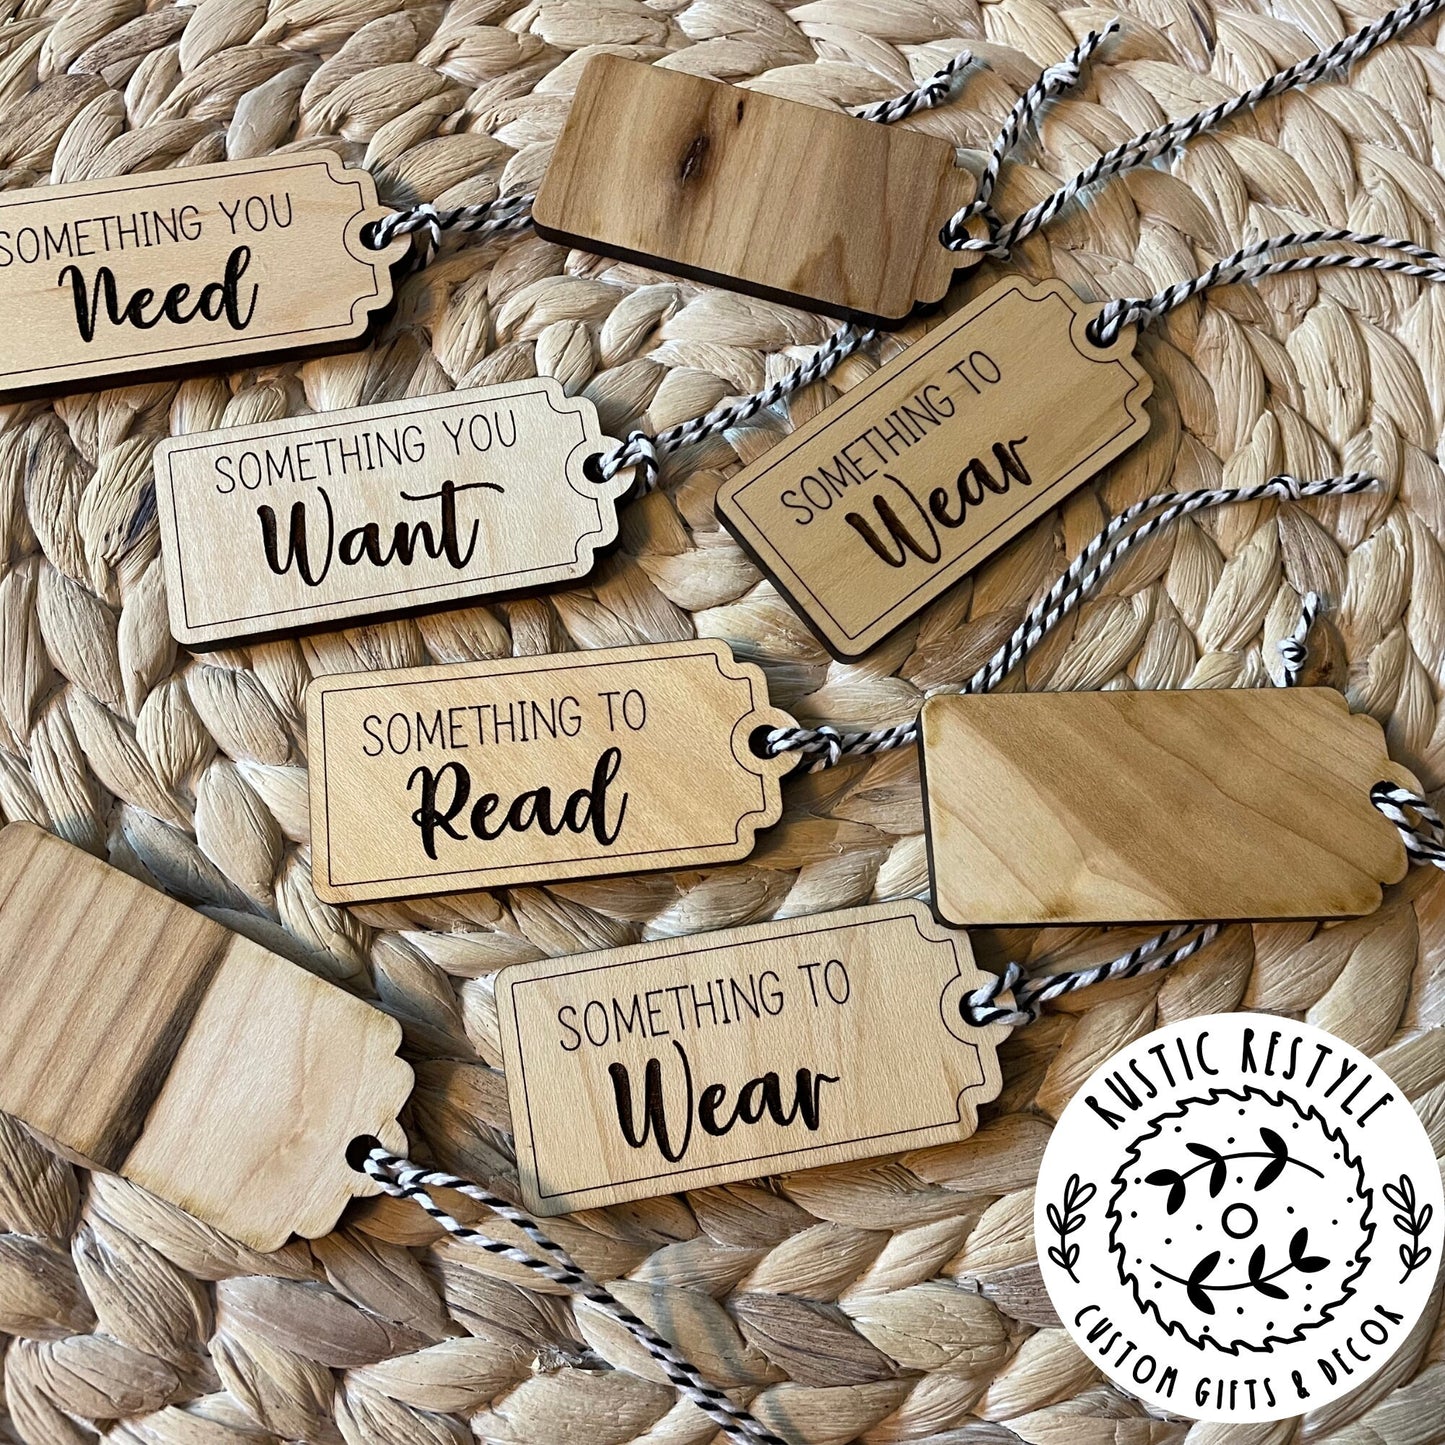 A pile of Christmas gift tags laying on a woven placemat. A mix of 4 sayings, Something to : Want, Wear, Read, and Need. Tags show both fronts and backs of tags. Each tag has a black and white bakers twine string.